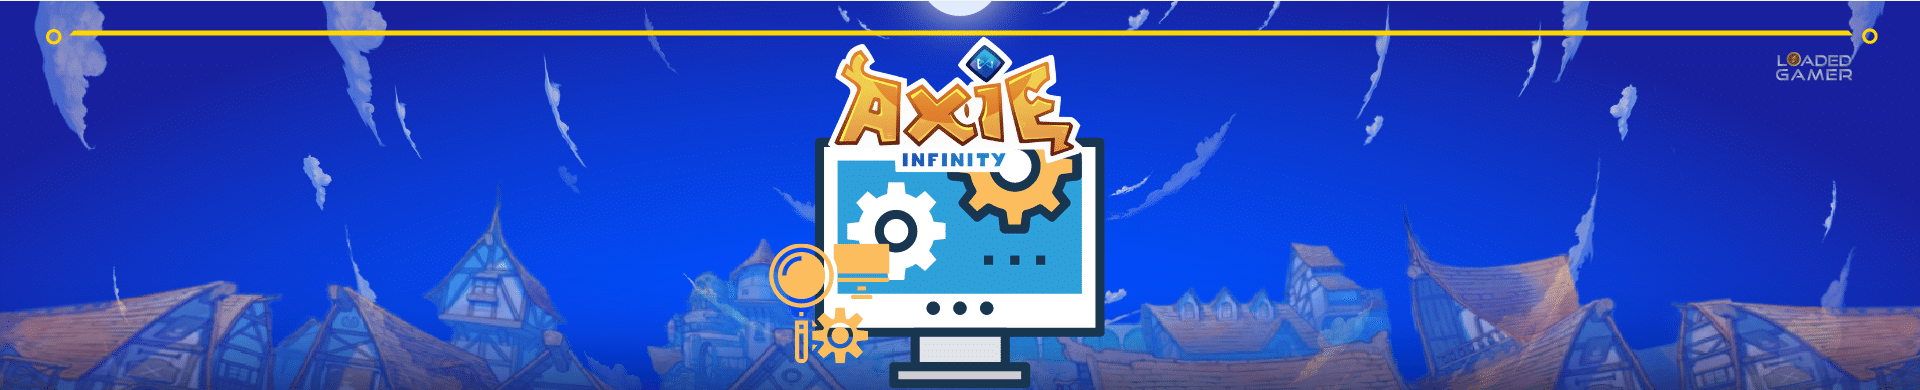 Troubleshooting Performance & Technical Issues in Axie Infinity